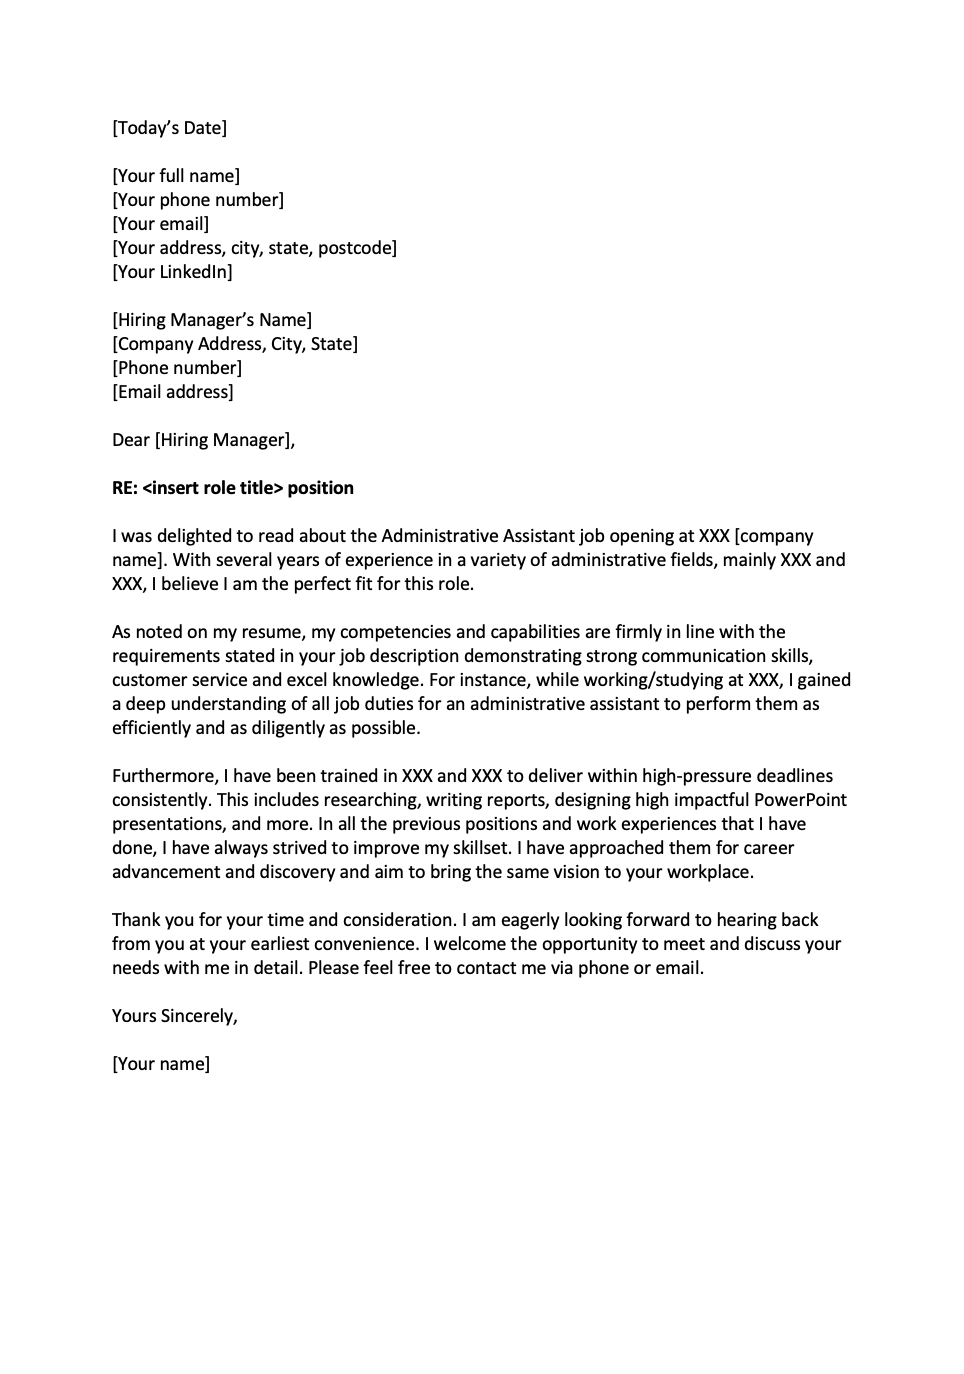 Administration Cover Letter Example